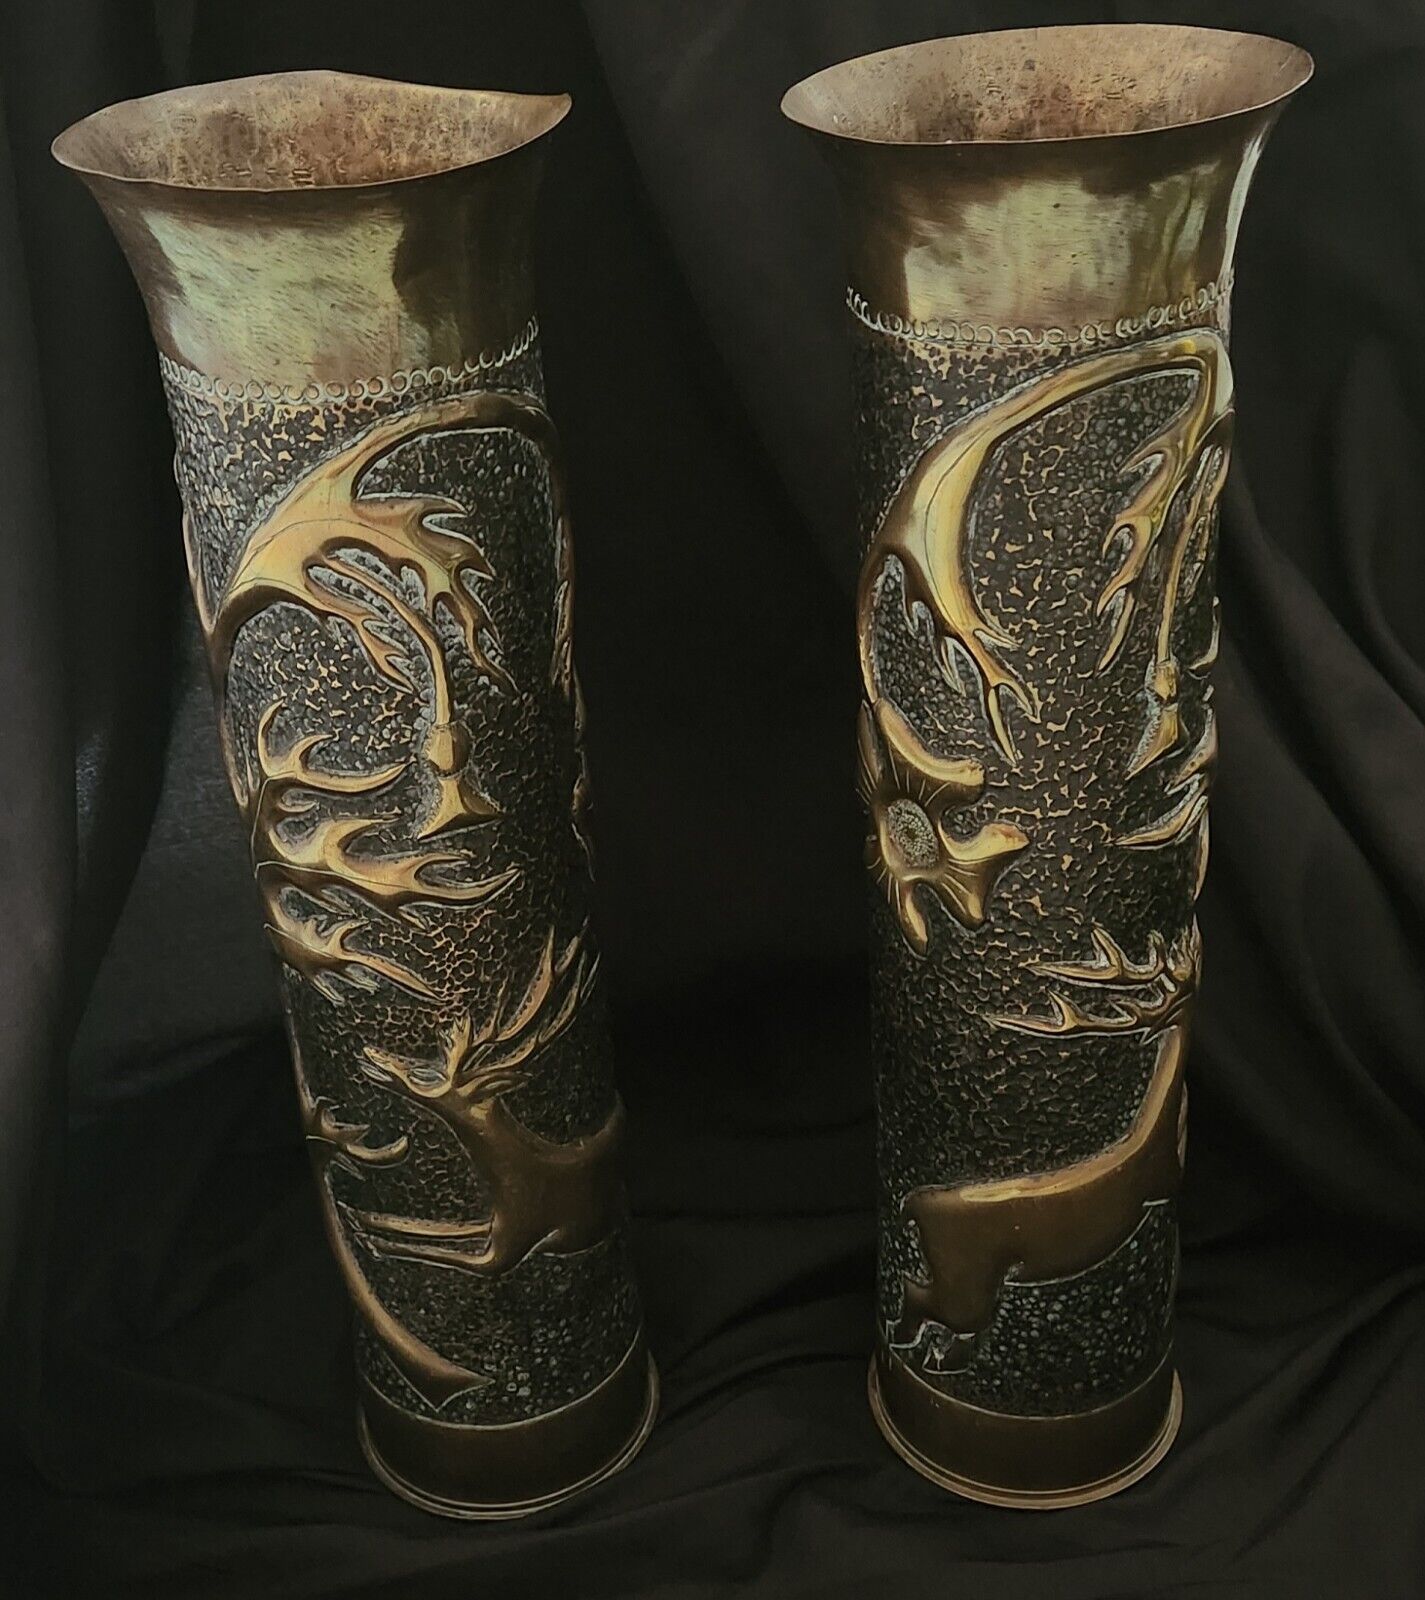 Matching Pair WWI WW1 Trench Art French 75mm Shells With Deer And Antler Pattern